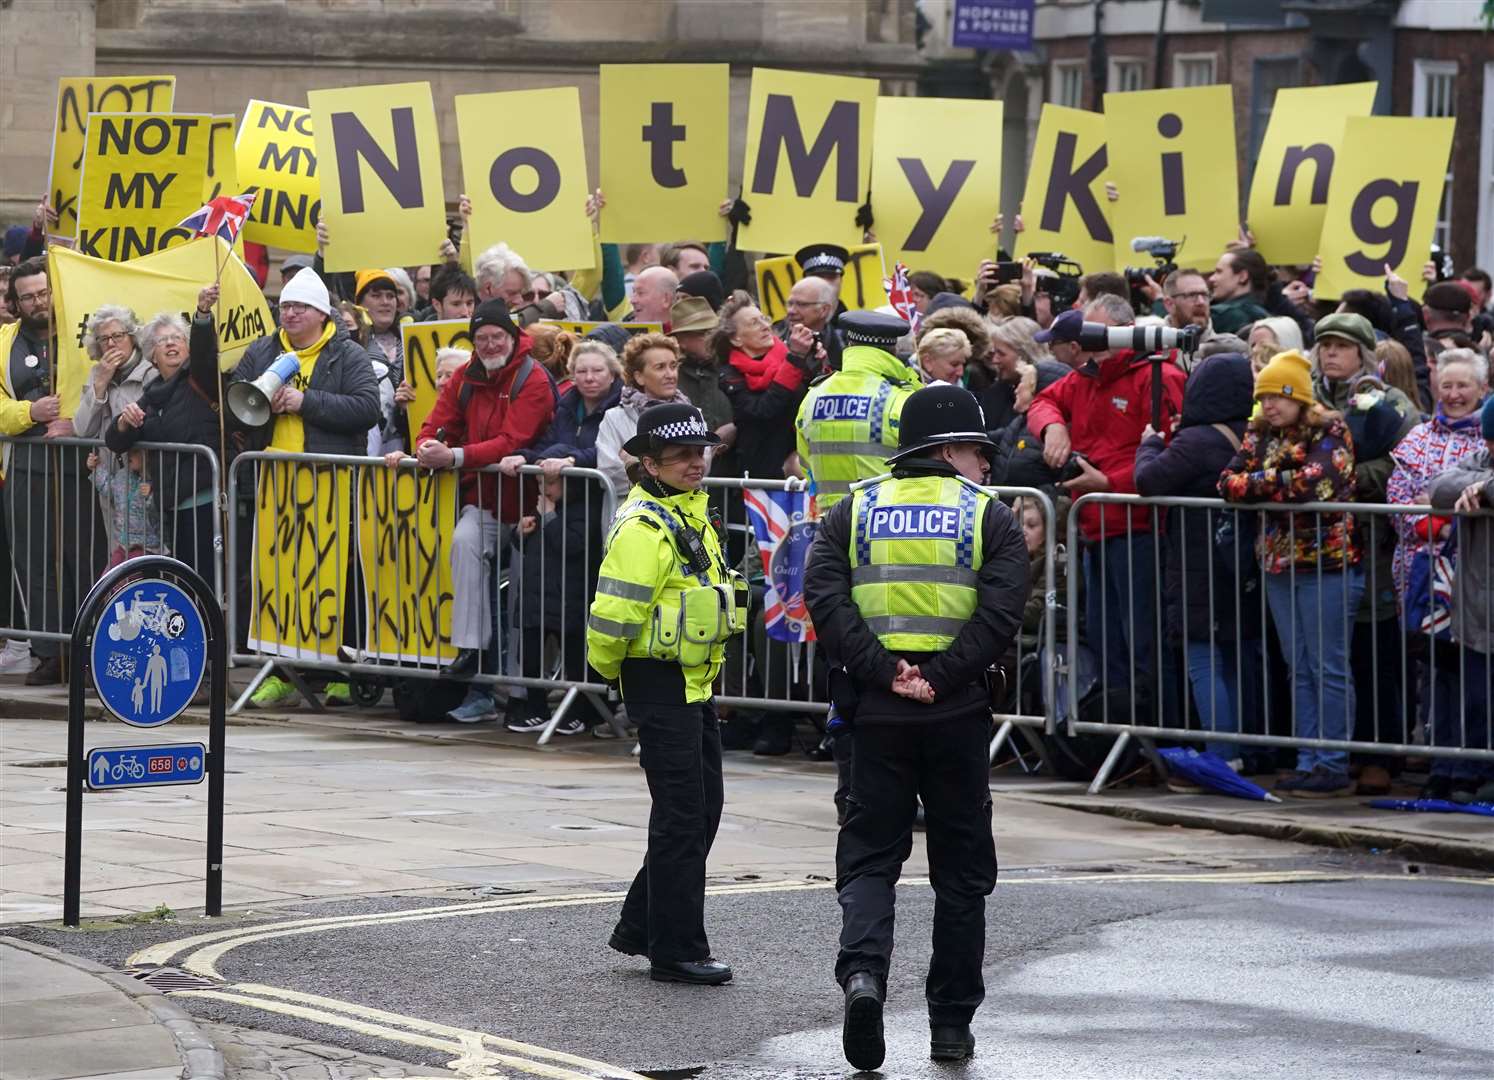 Protesters await the arrival of the King in York (Owen Humphreys/PA)